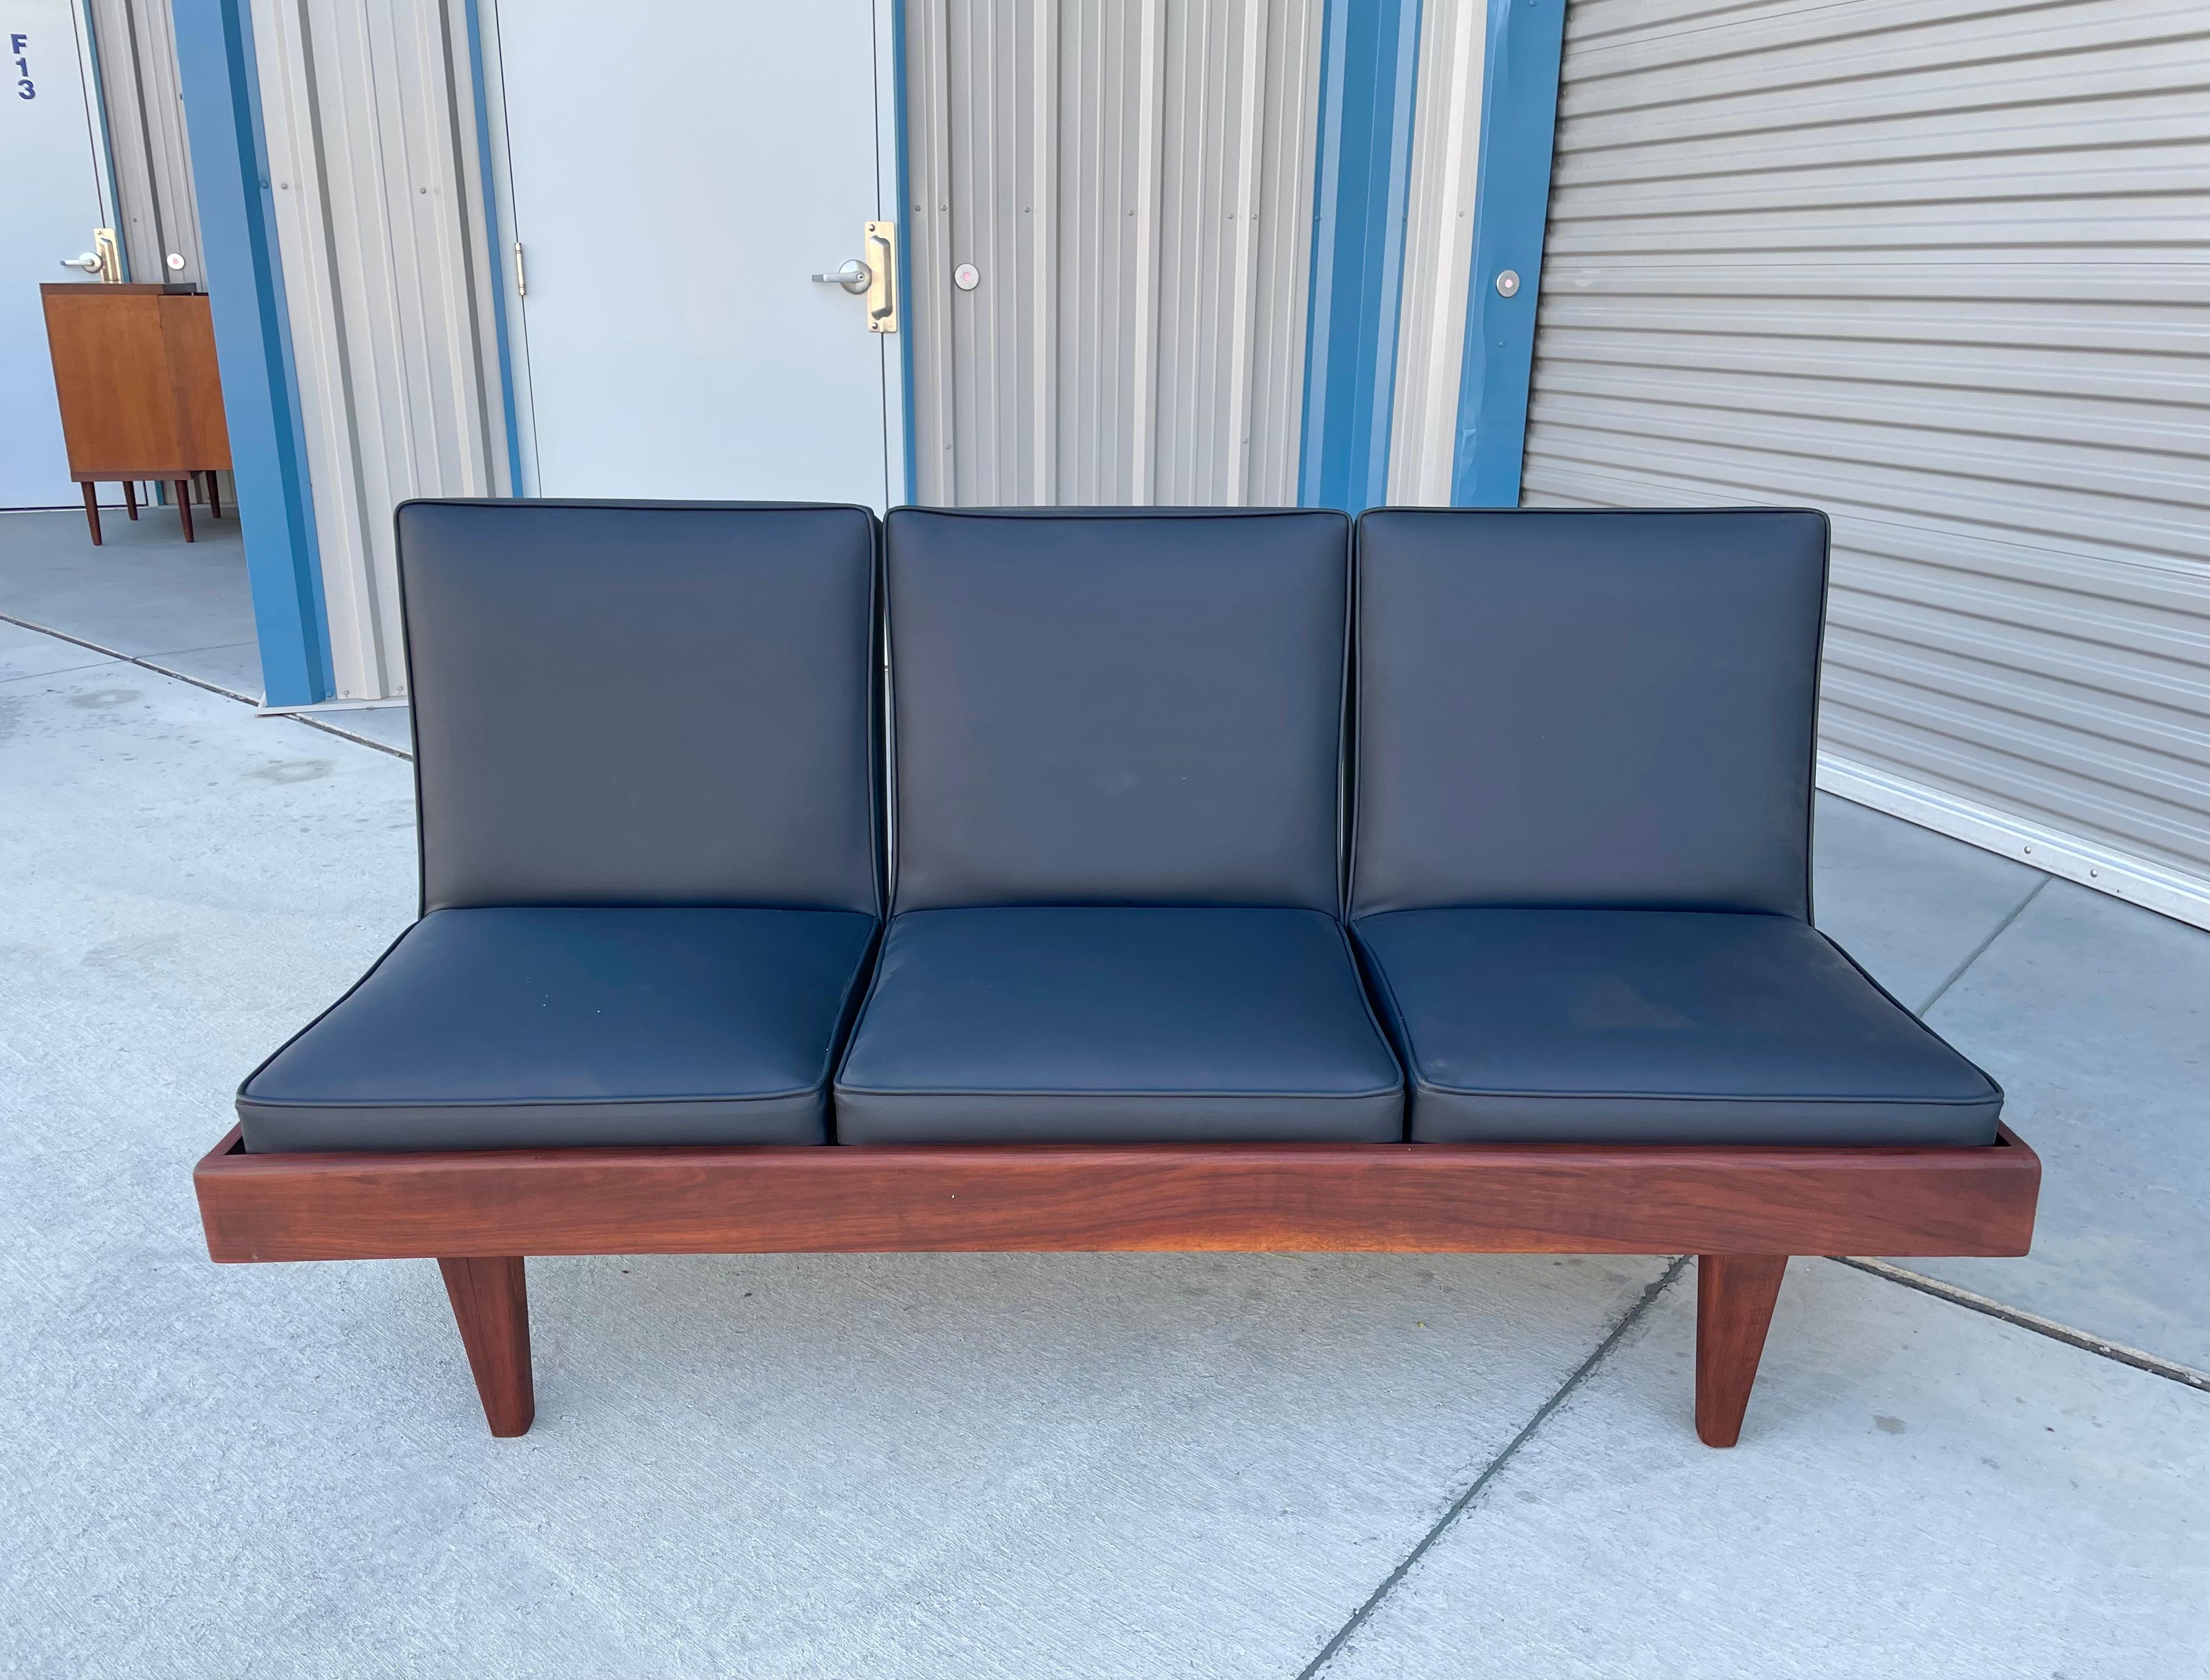 1960s Mid Century Walnut & Vinyl Sofa In Good Condition For Sale In North Hollywood, CA